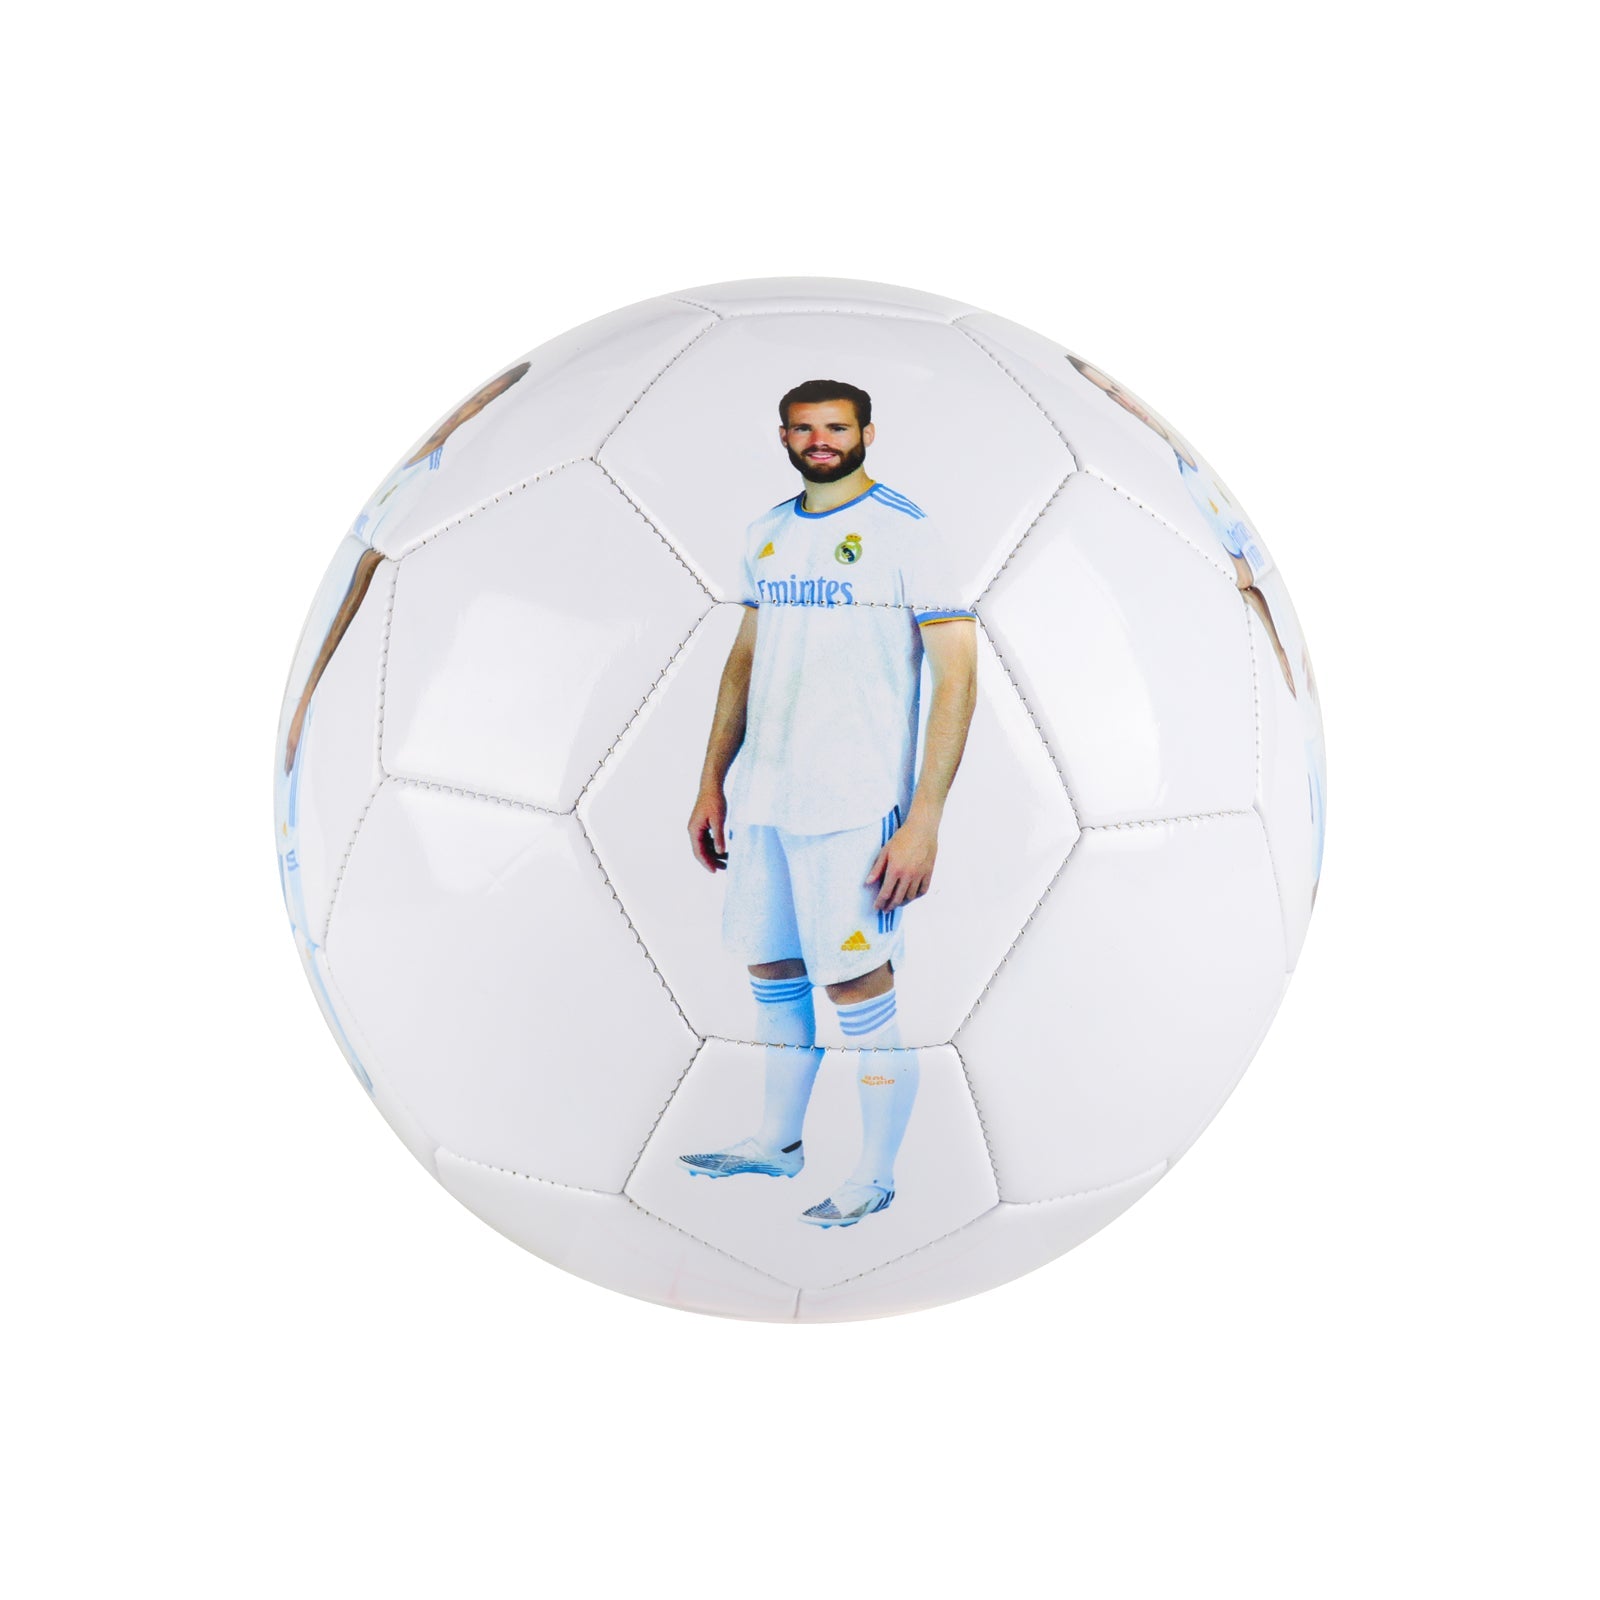 Personalized Custom Soccer Ball For Soccer Players Gift - Family Watchs